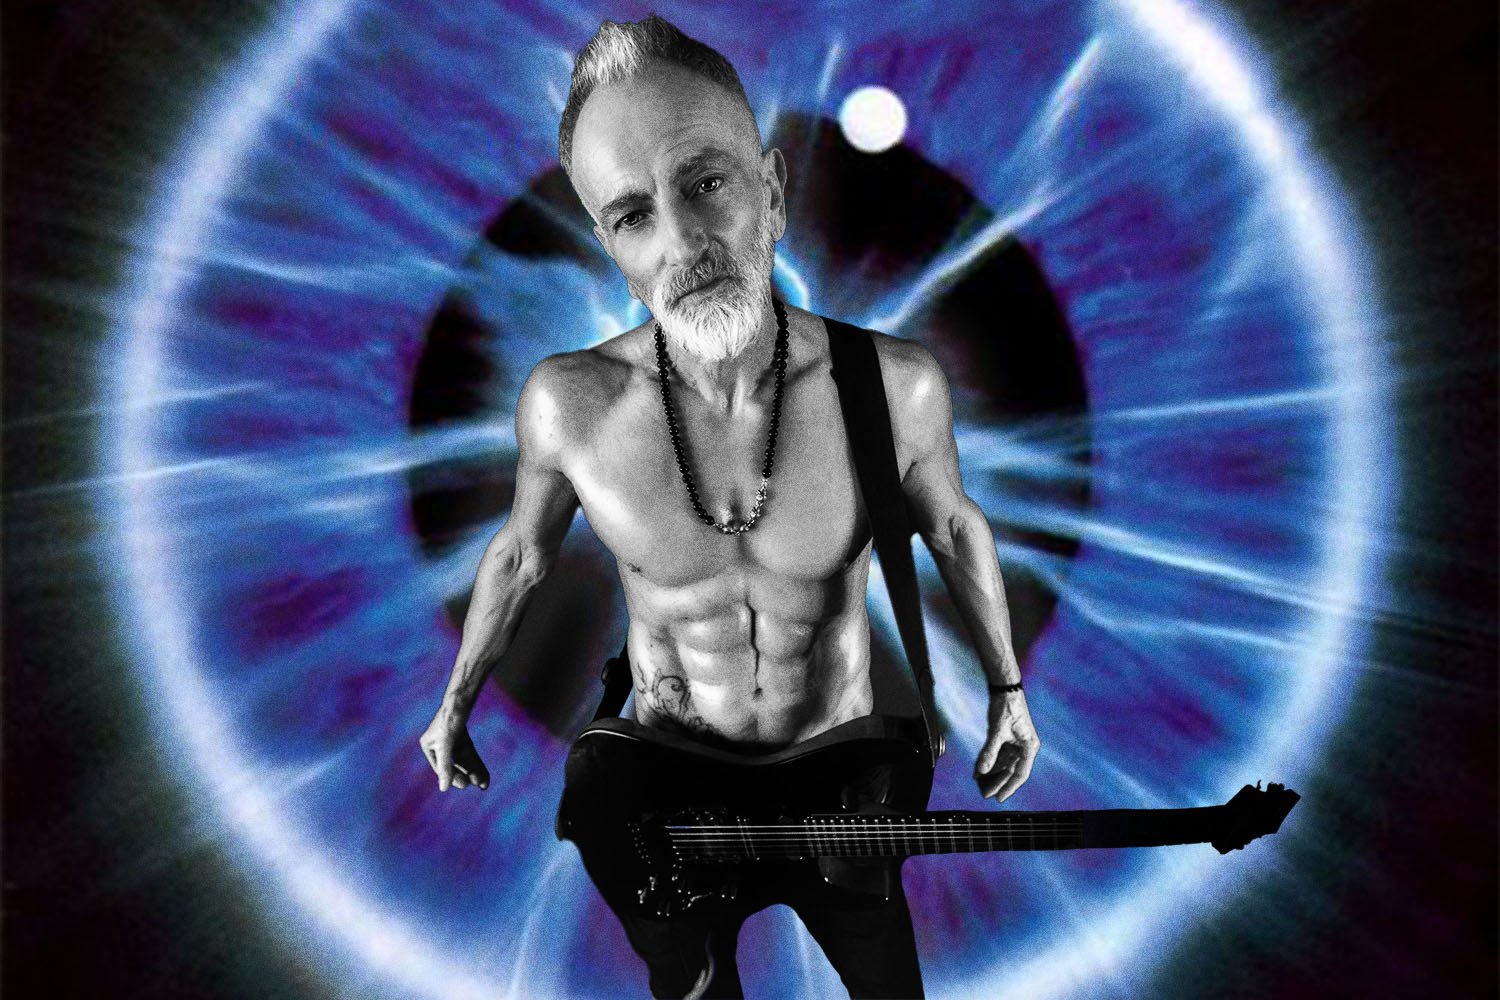 At 63, Def Leppard’s Phil Collen Is the World’s Fittest Rock Star